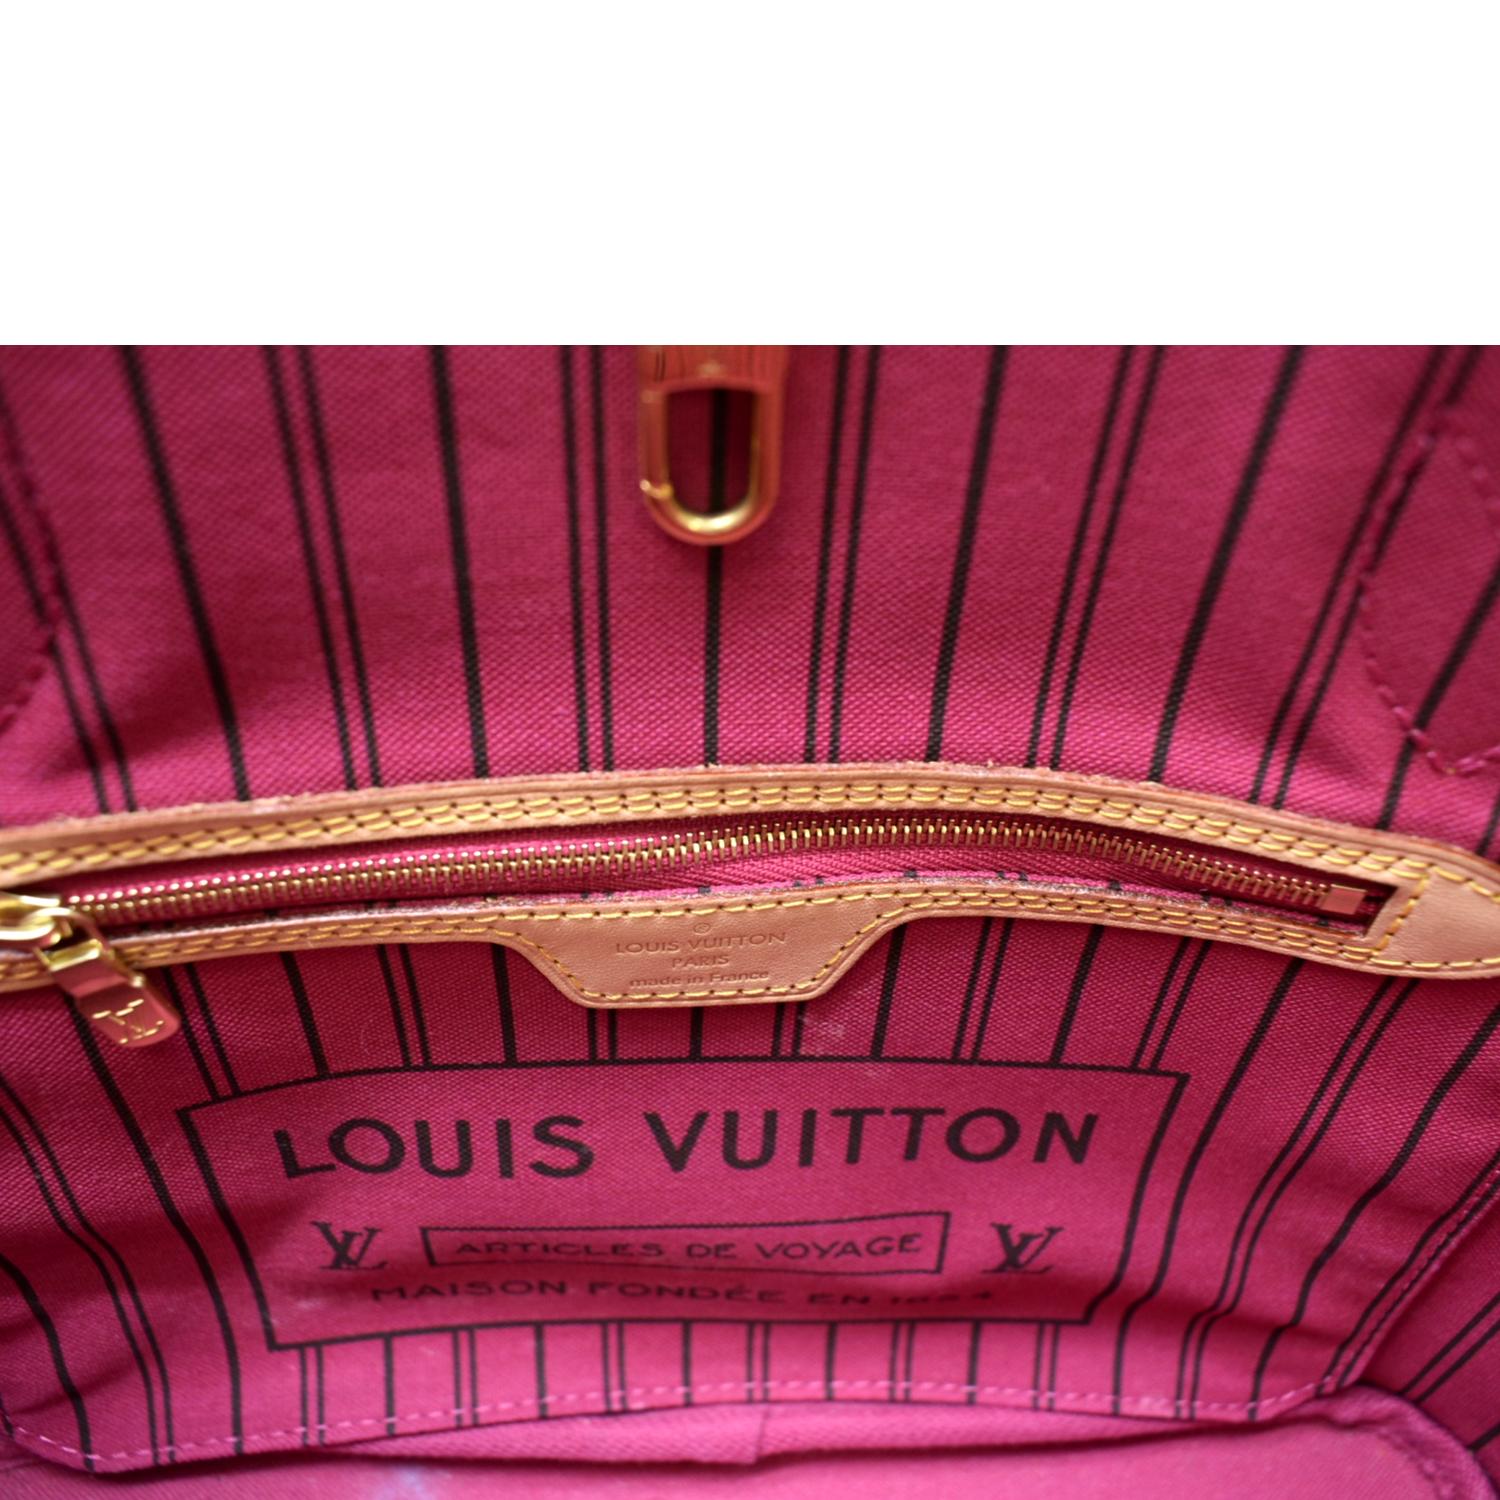 Louis+Vuitton+Neverfull+Tote+PM+Brown+Canvas%2FLeather for sale